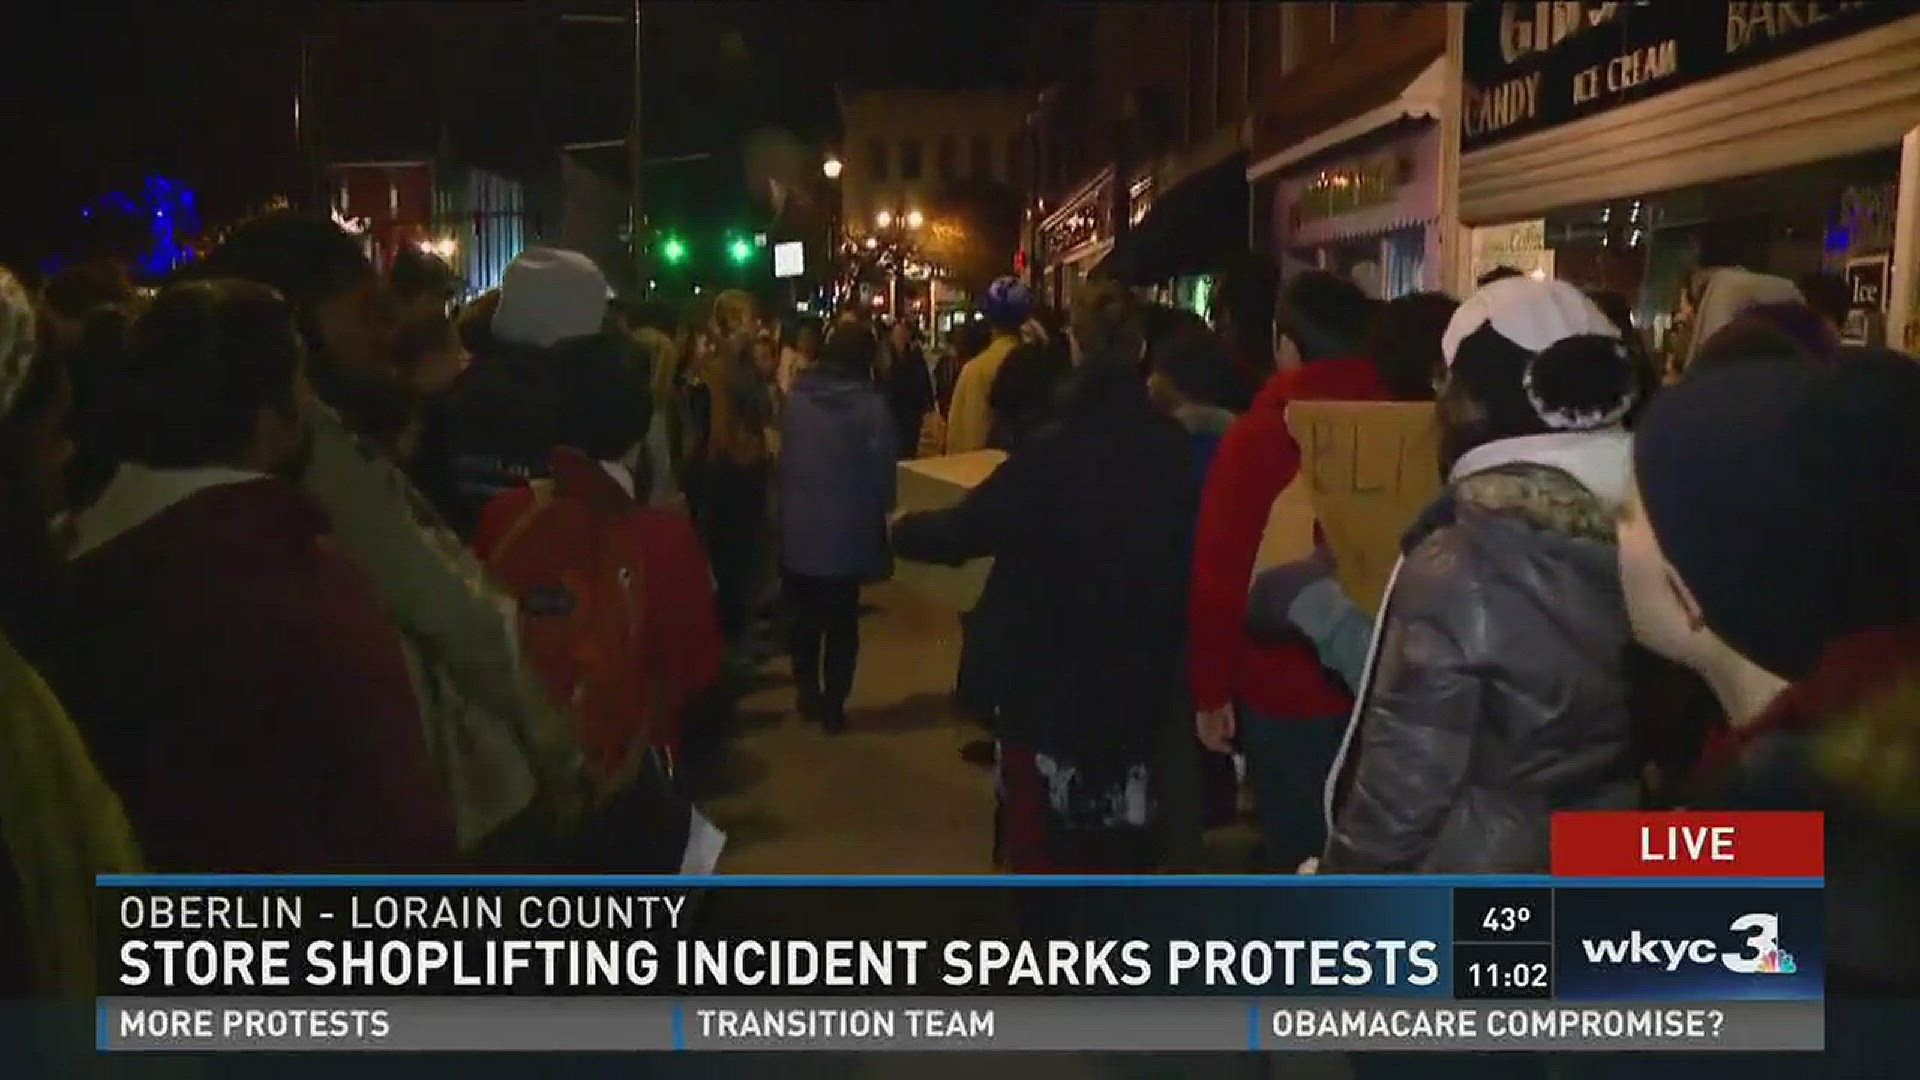 Store shoplifting incident sparks protests